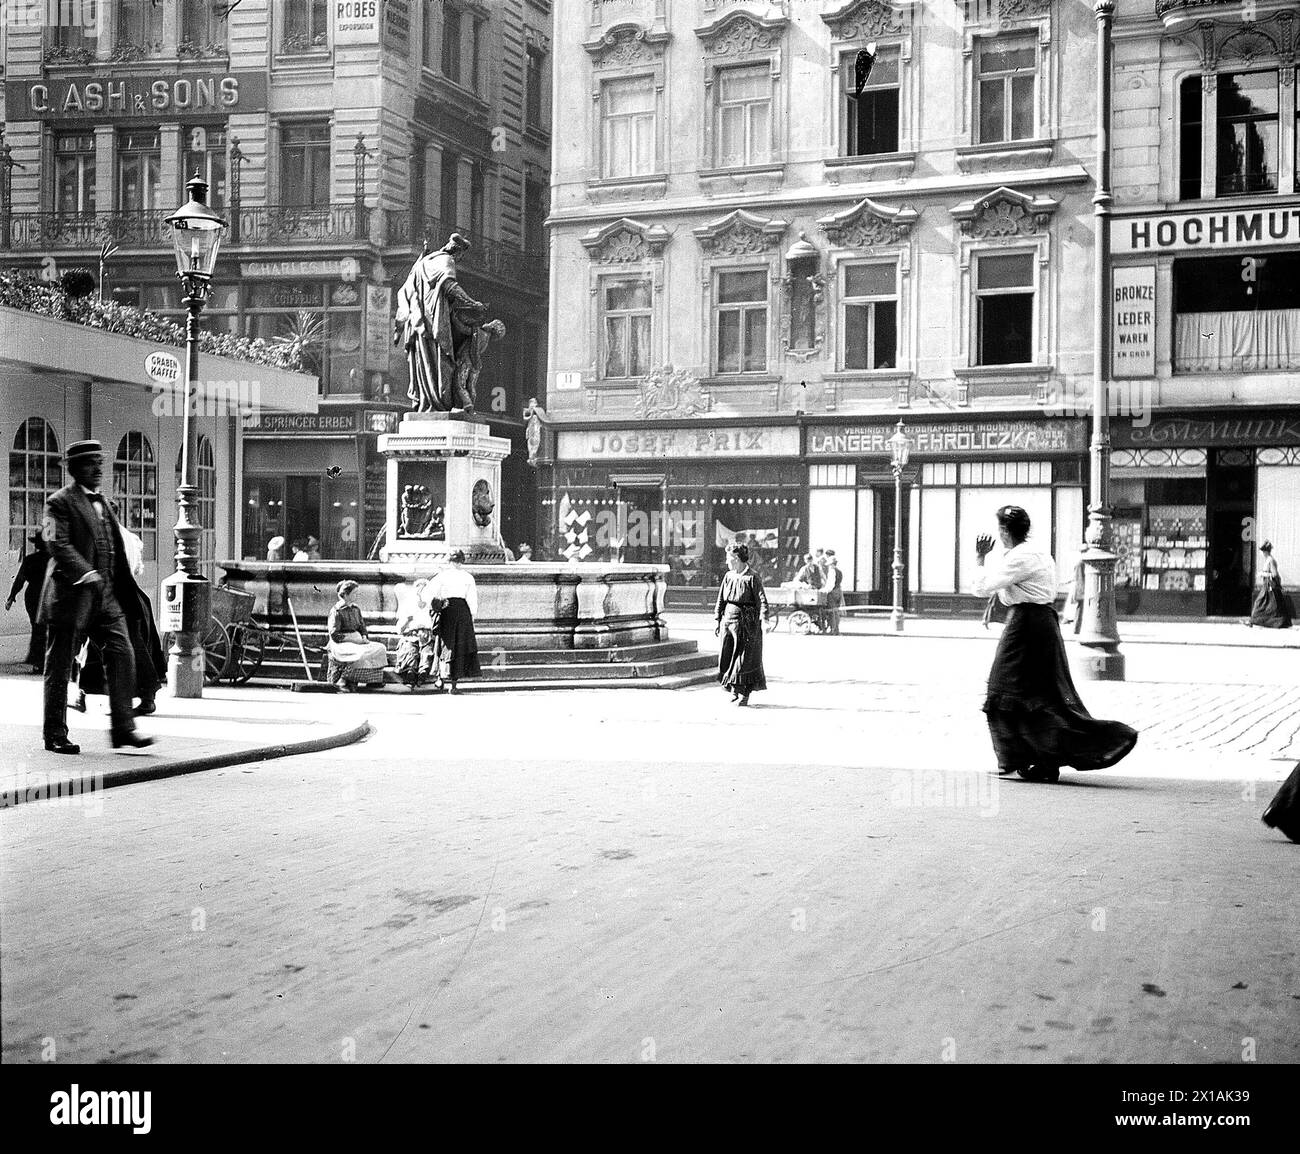 Vienna 1, Leopoldsbrunnen (Leopolds Fountain), image of the Leopoldsbrunnen (Leopolds Fountain). view from the Trattnerhof direction Dorotheergasse (Dorotheer Alley), 16.08.1916 - 19160816 PD0001 - Rechteinfo: Rights Managed (RM) Stock Photo